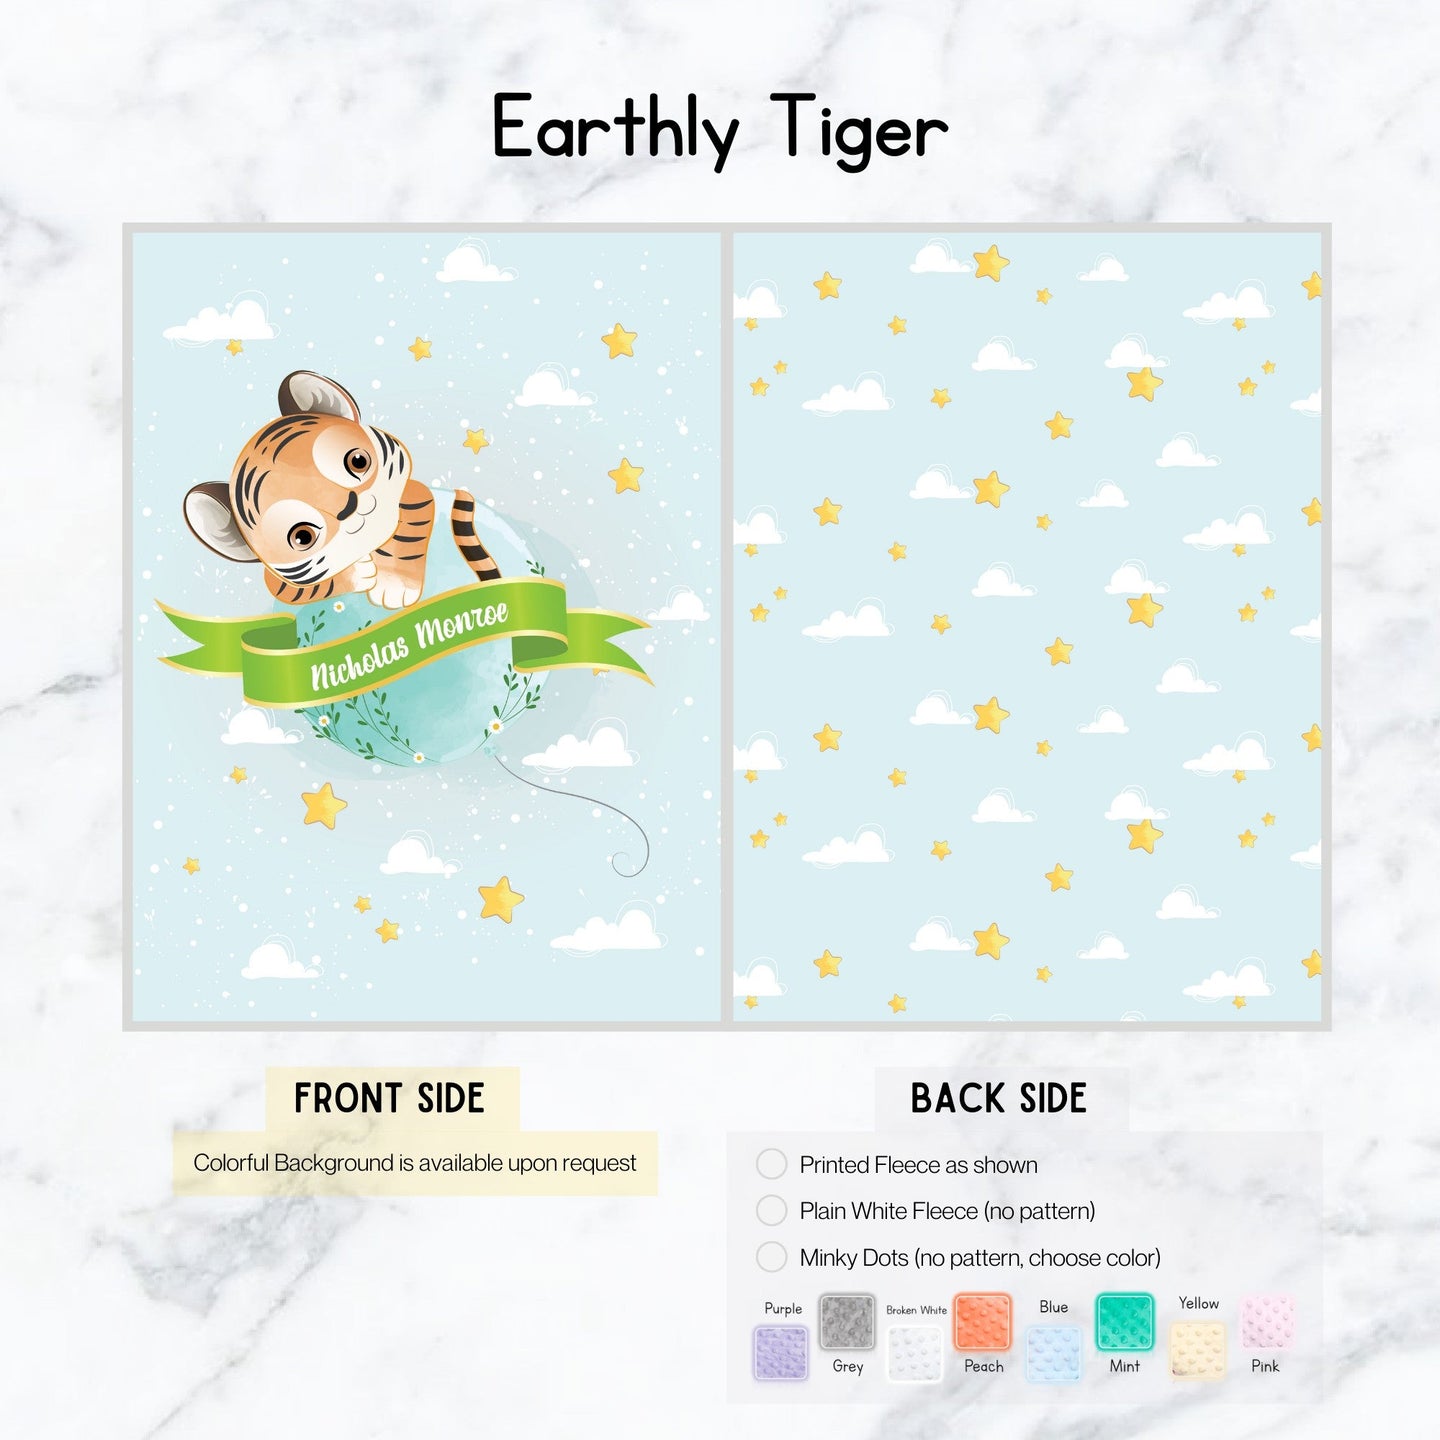 Earthly Tiger